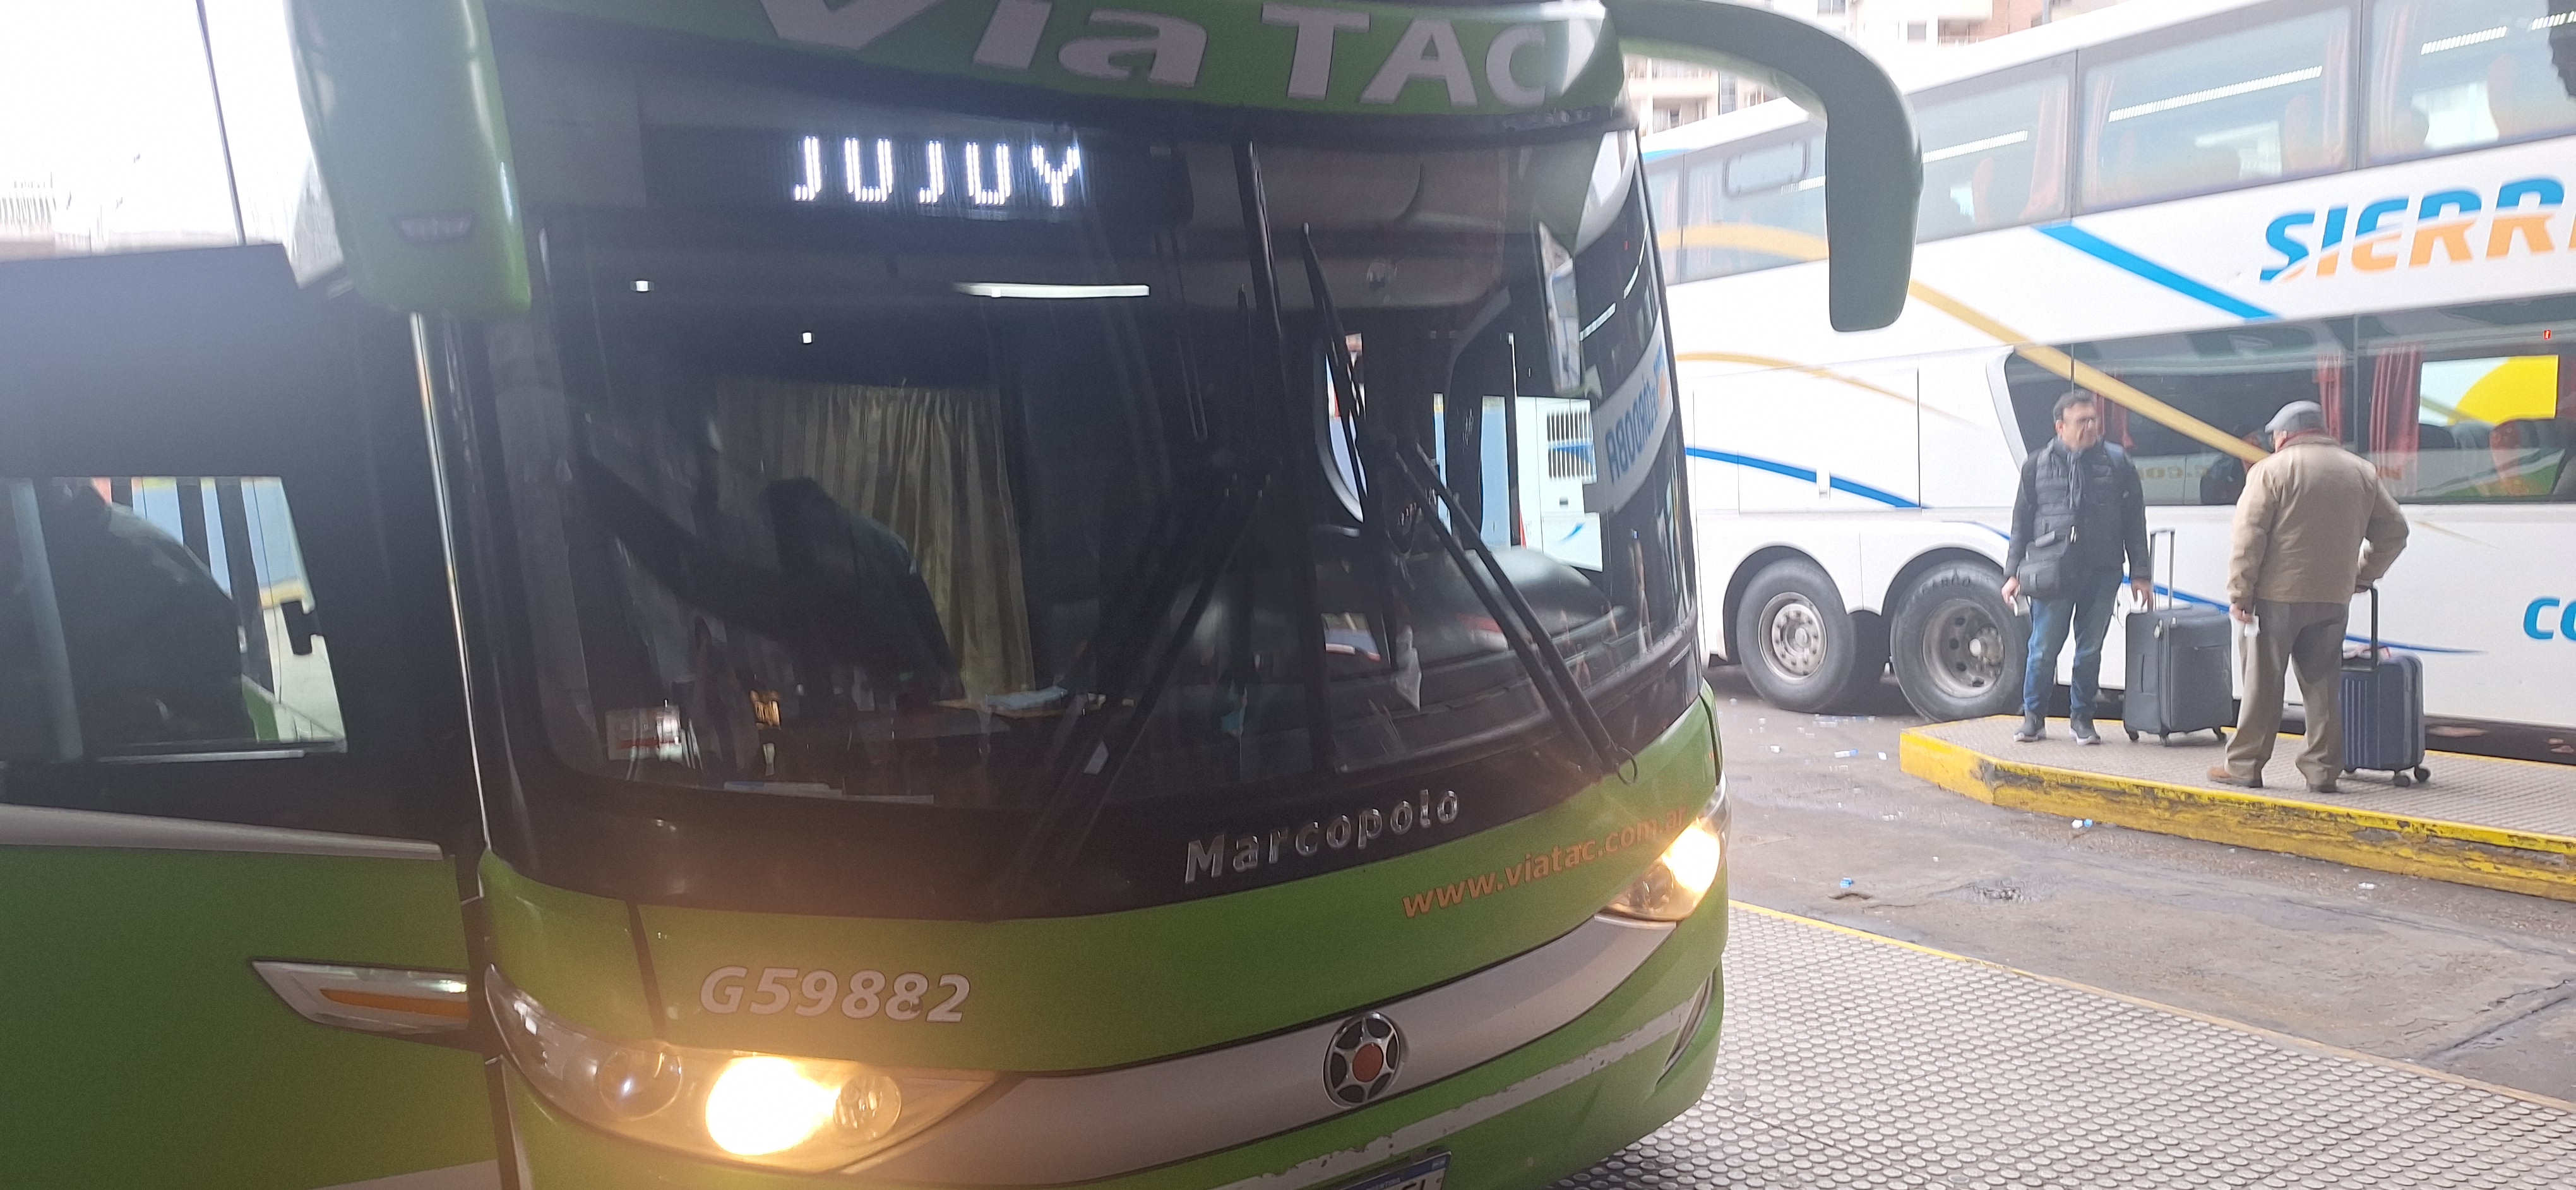 Photo Of The Very Late Bus In Cordoba Capital City